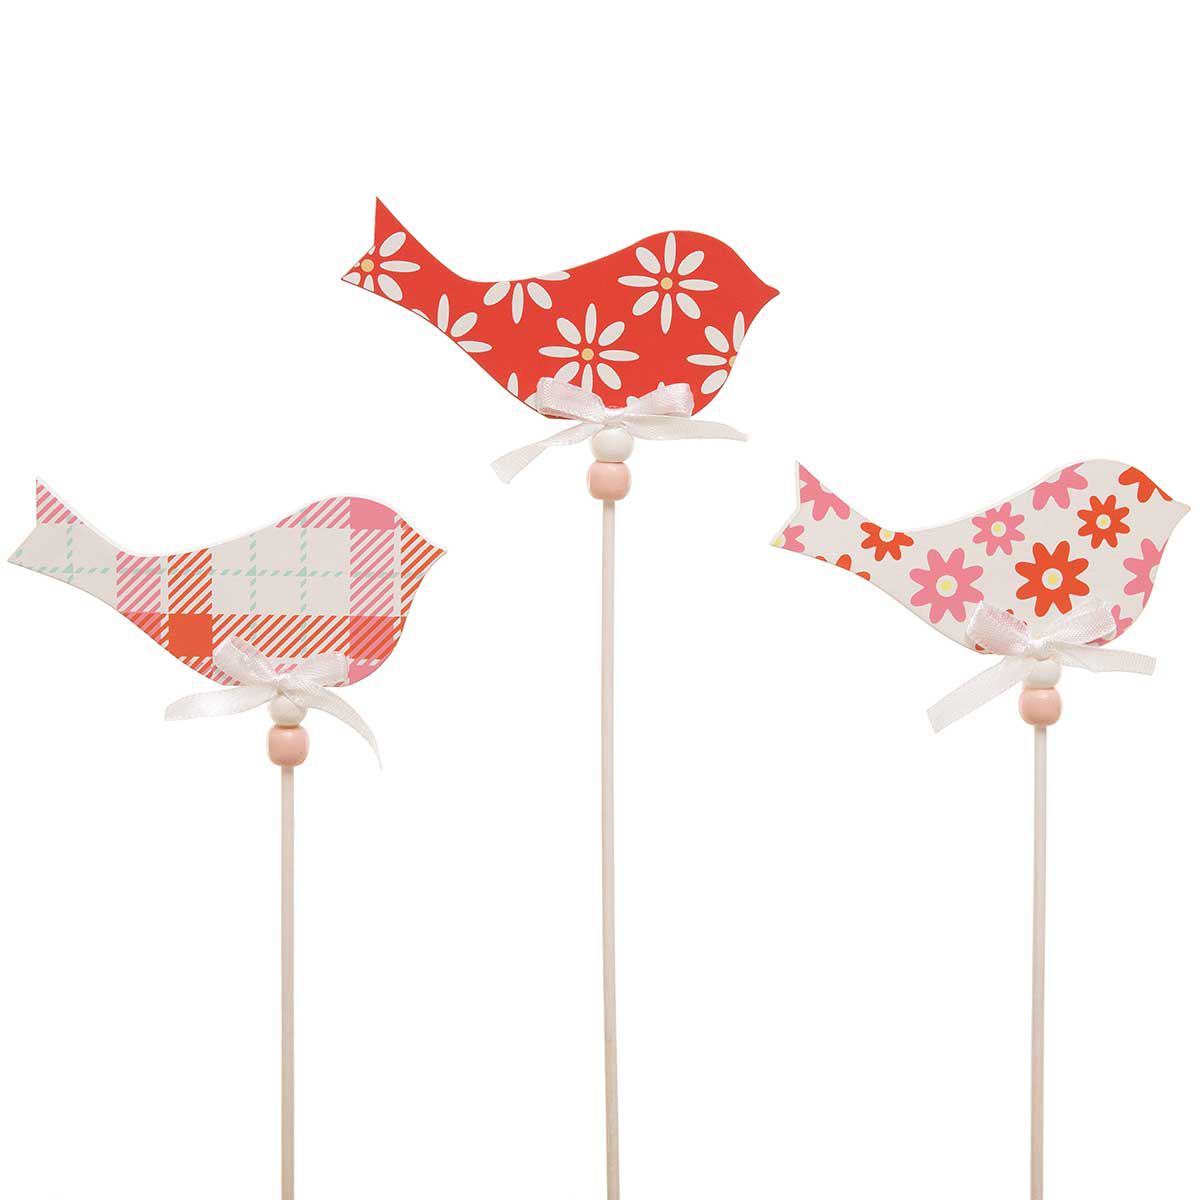 CORAL FAIR WOOD BIRD SILHOUETTE ON STICK CORAL/WHITE